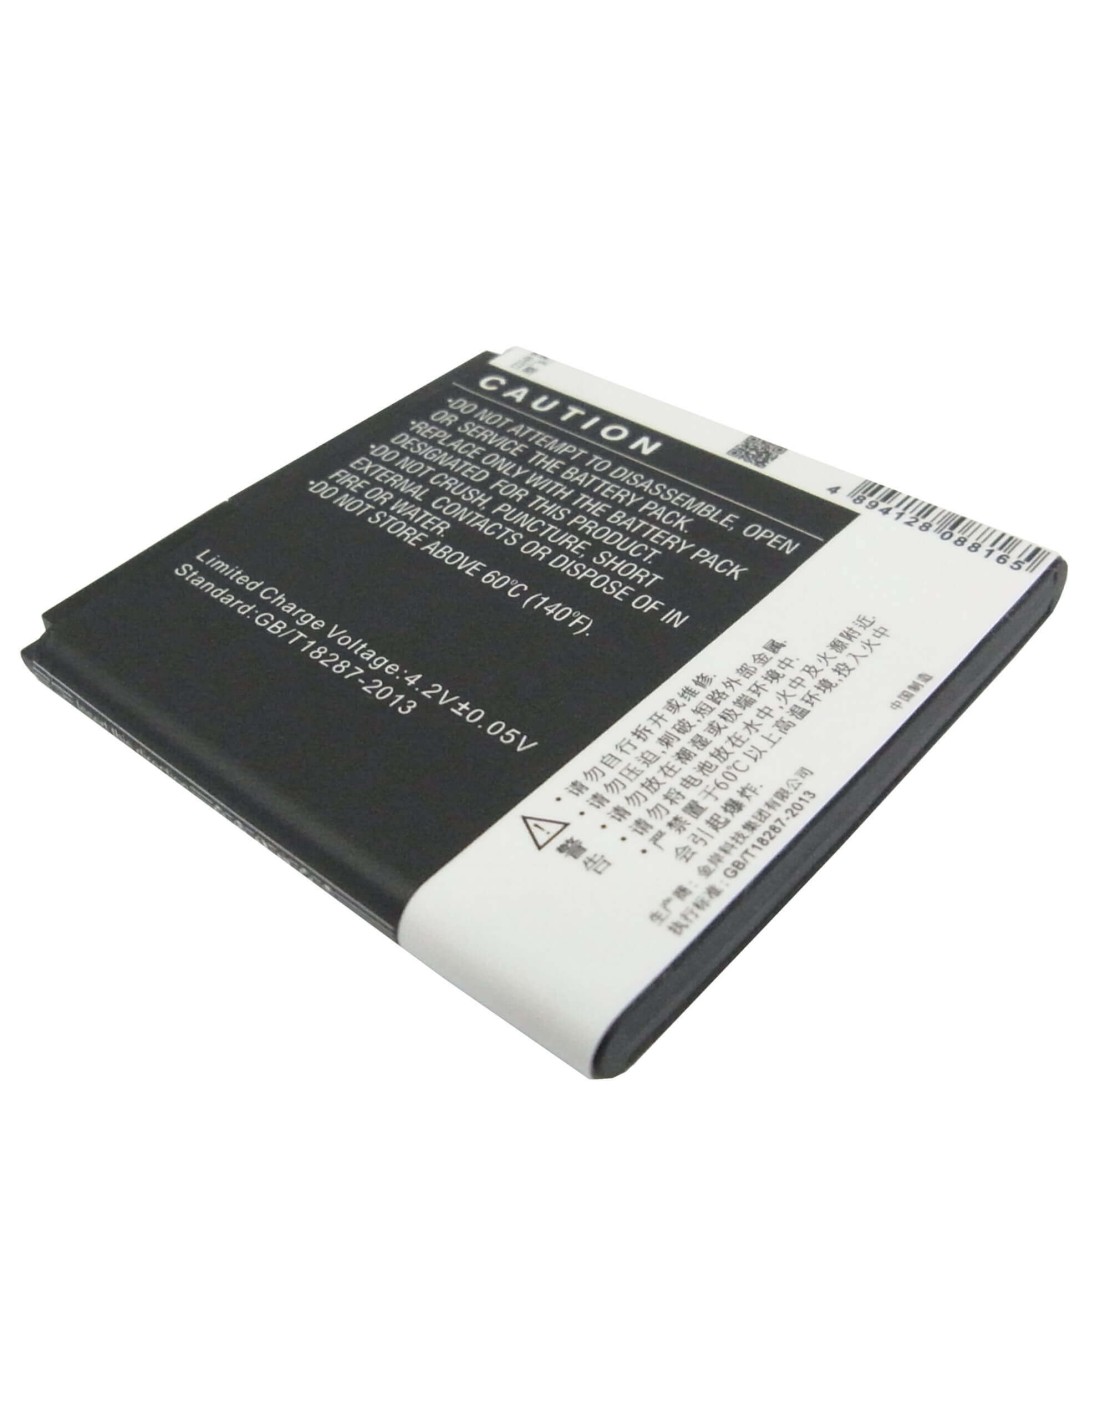 Battery for GIONEE GN320, GN380, GN205 3.7V, 1550mAh - 5.74Wh